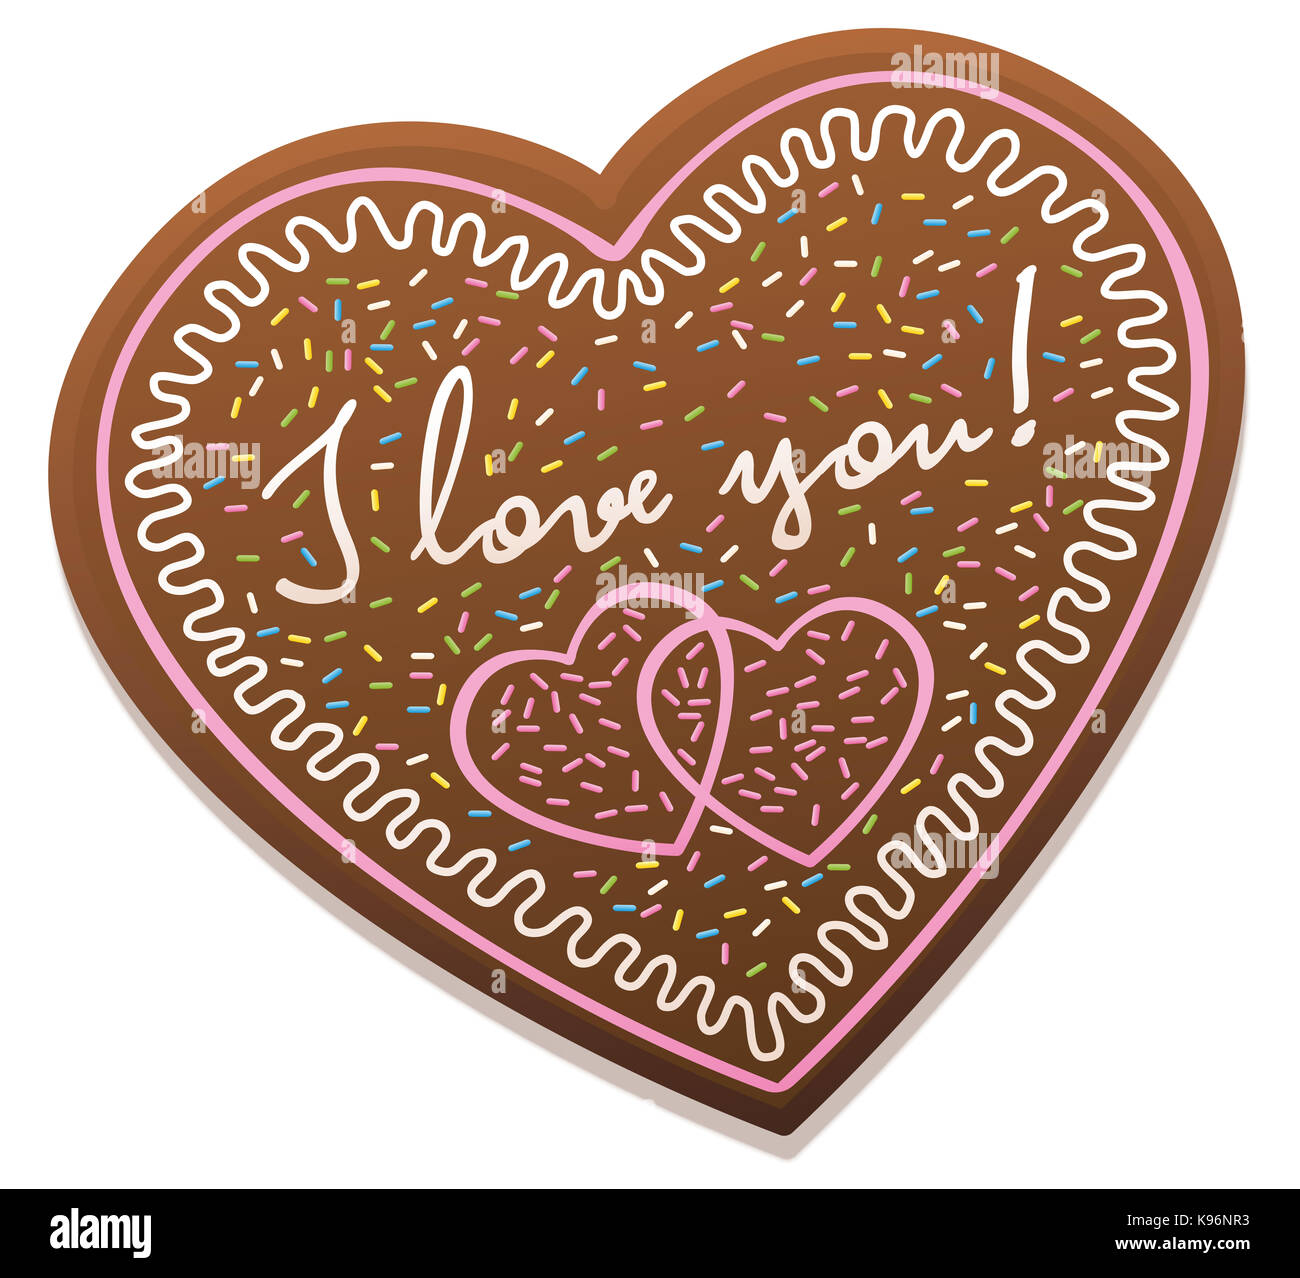 Gingerbread heart with the words I LOVE YOU. Illustration on white background. Stock Photo